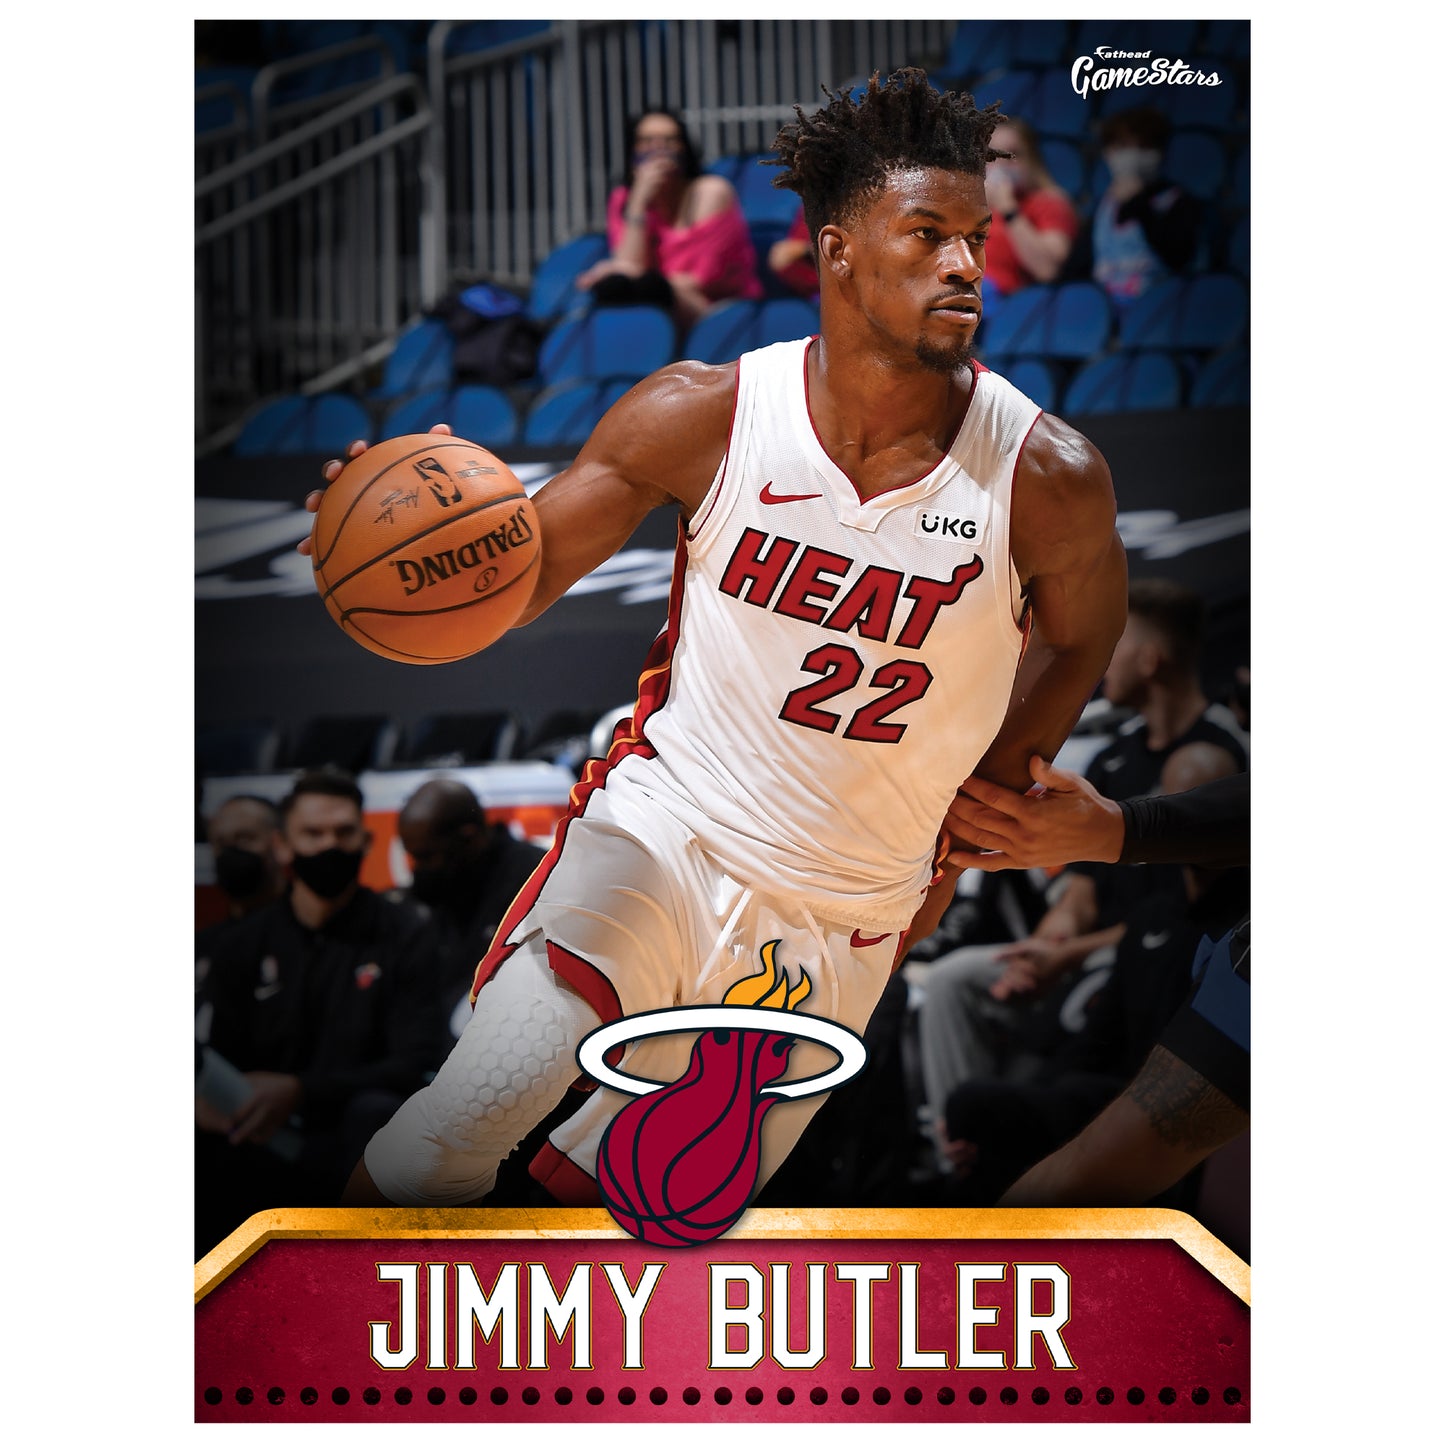 Miami Heat: Jimmy Butler 2021 Poster - Officially Licensed NBA